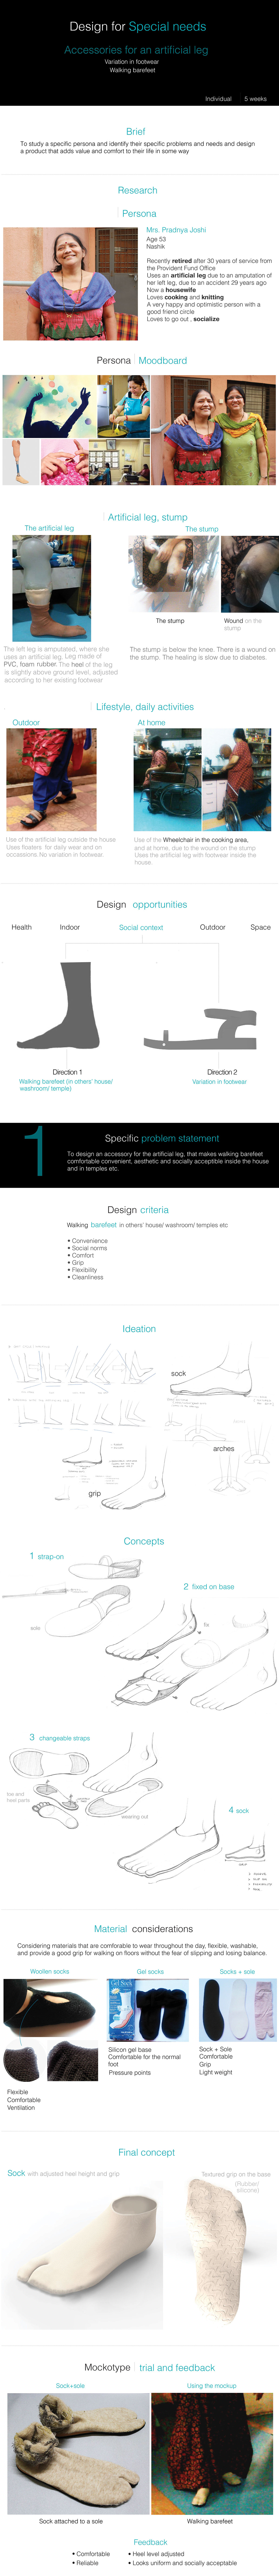 special needs artificial leg footwear design lifestyle product design 